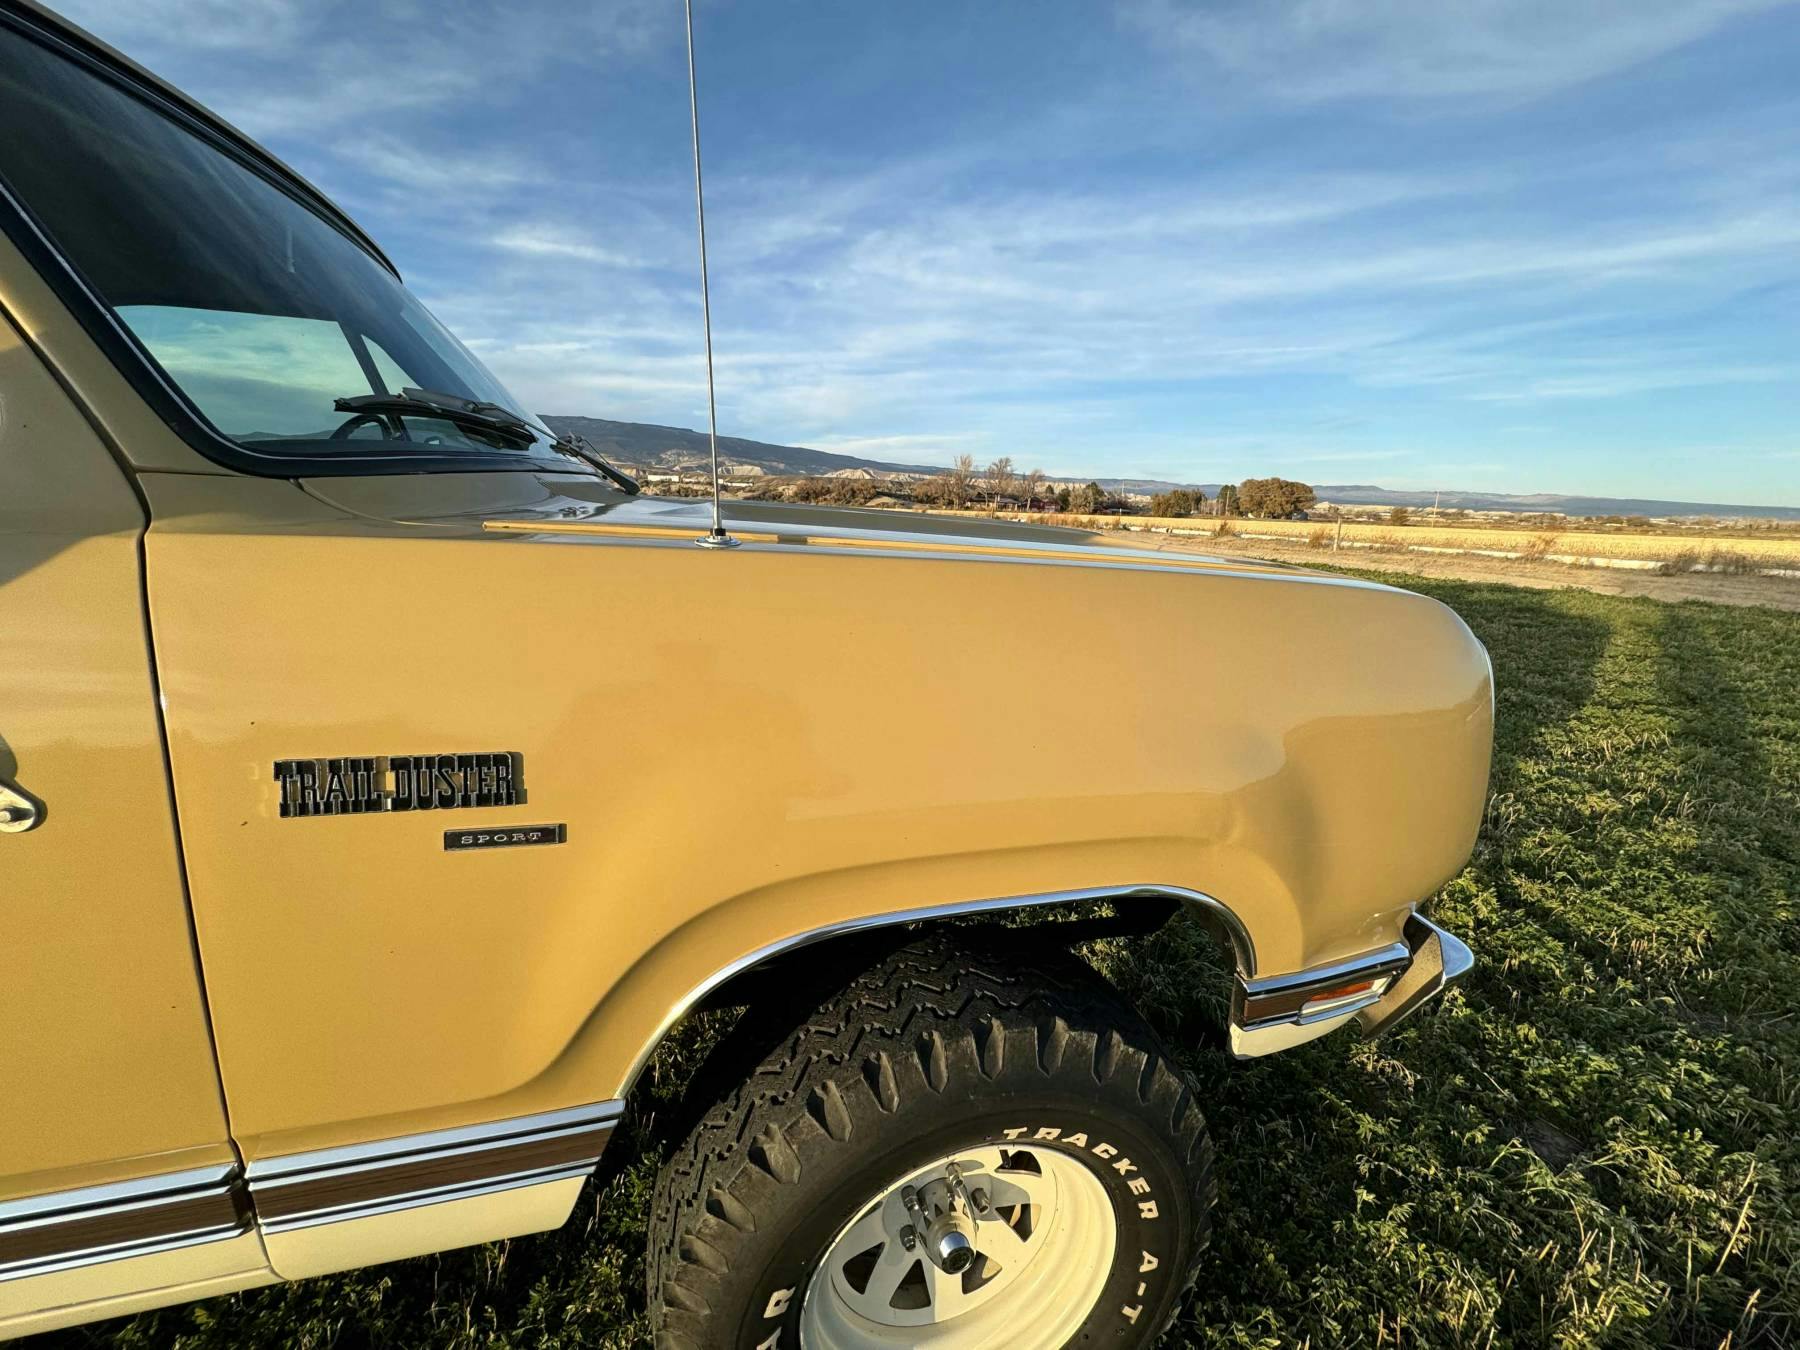 1976 Plymouth Trail Duster front quarter